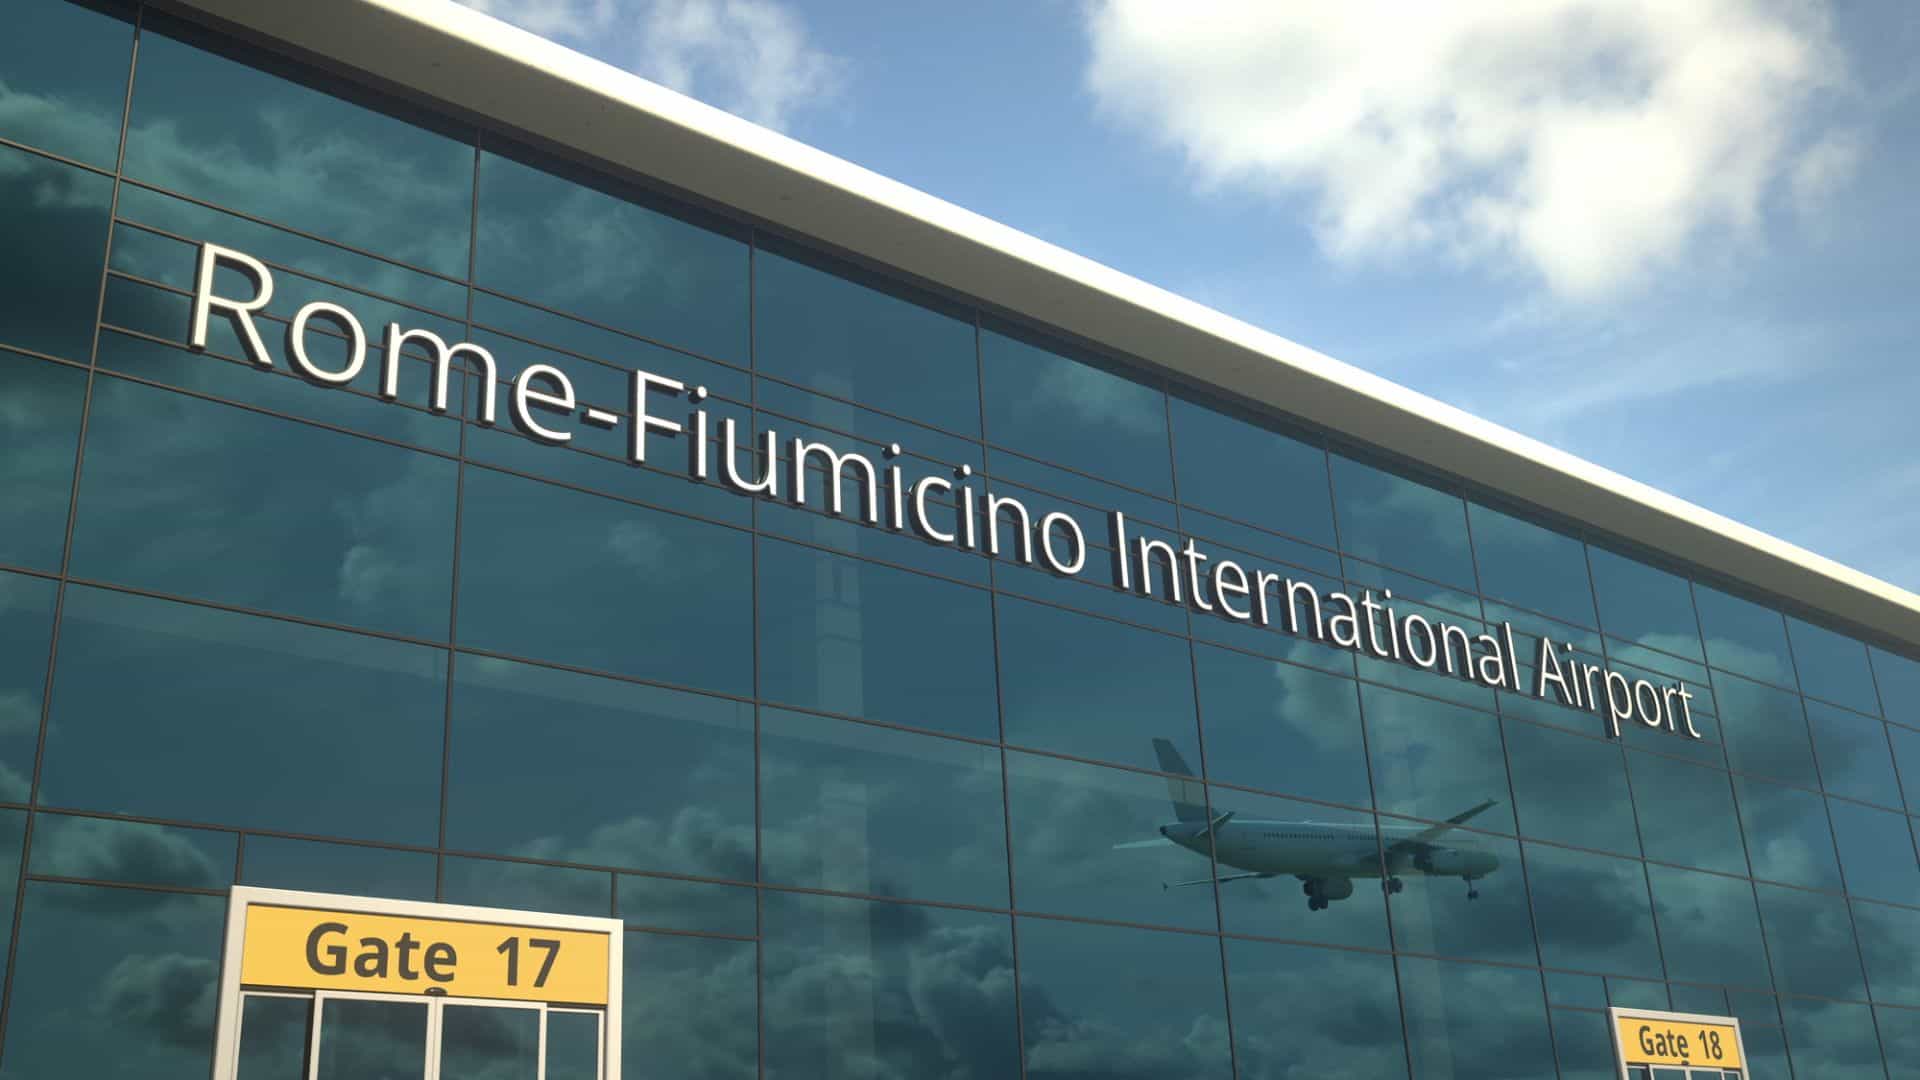 The exterior of Fiumicino Airport with the sign, reflecting a plane.